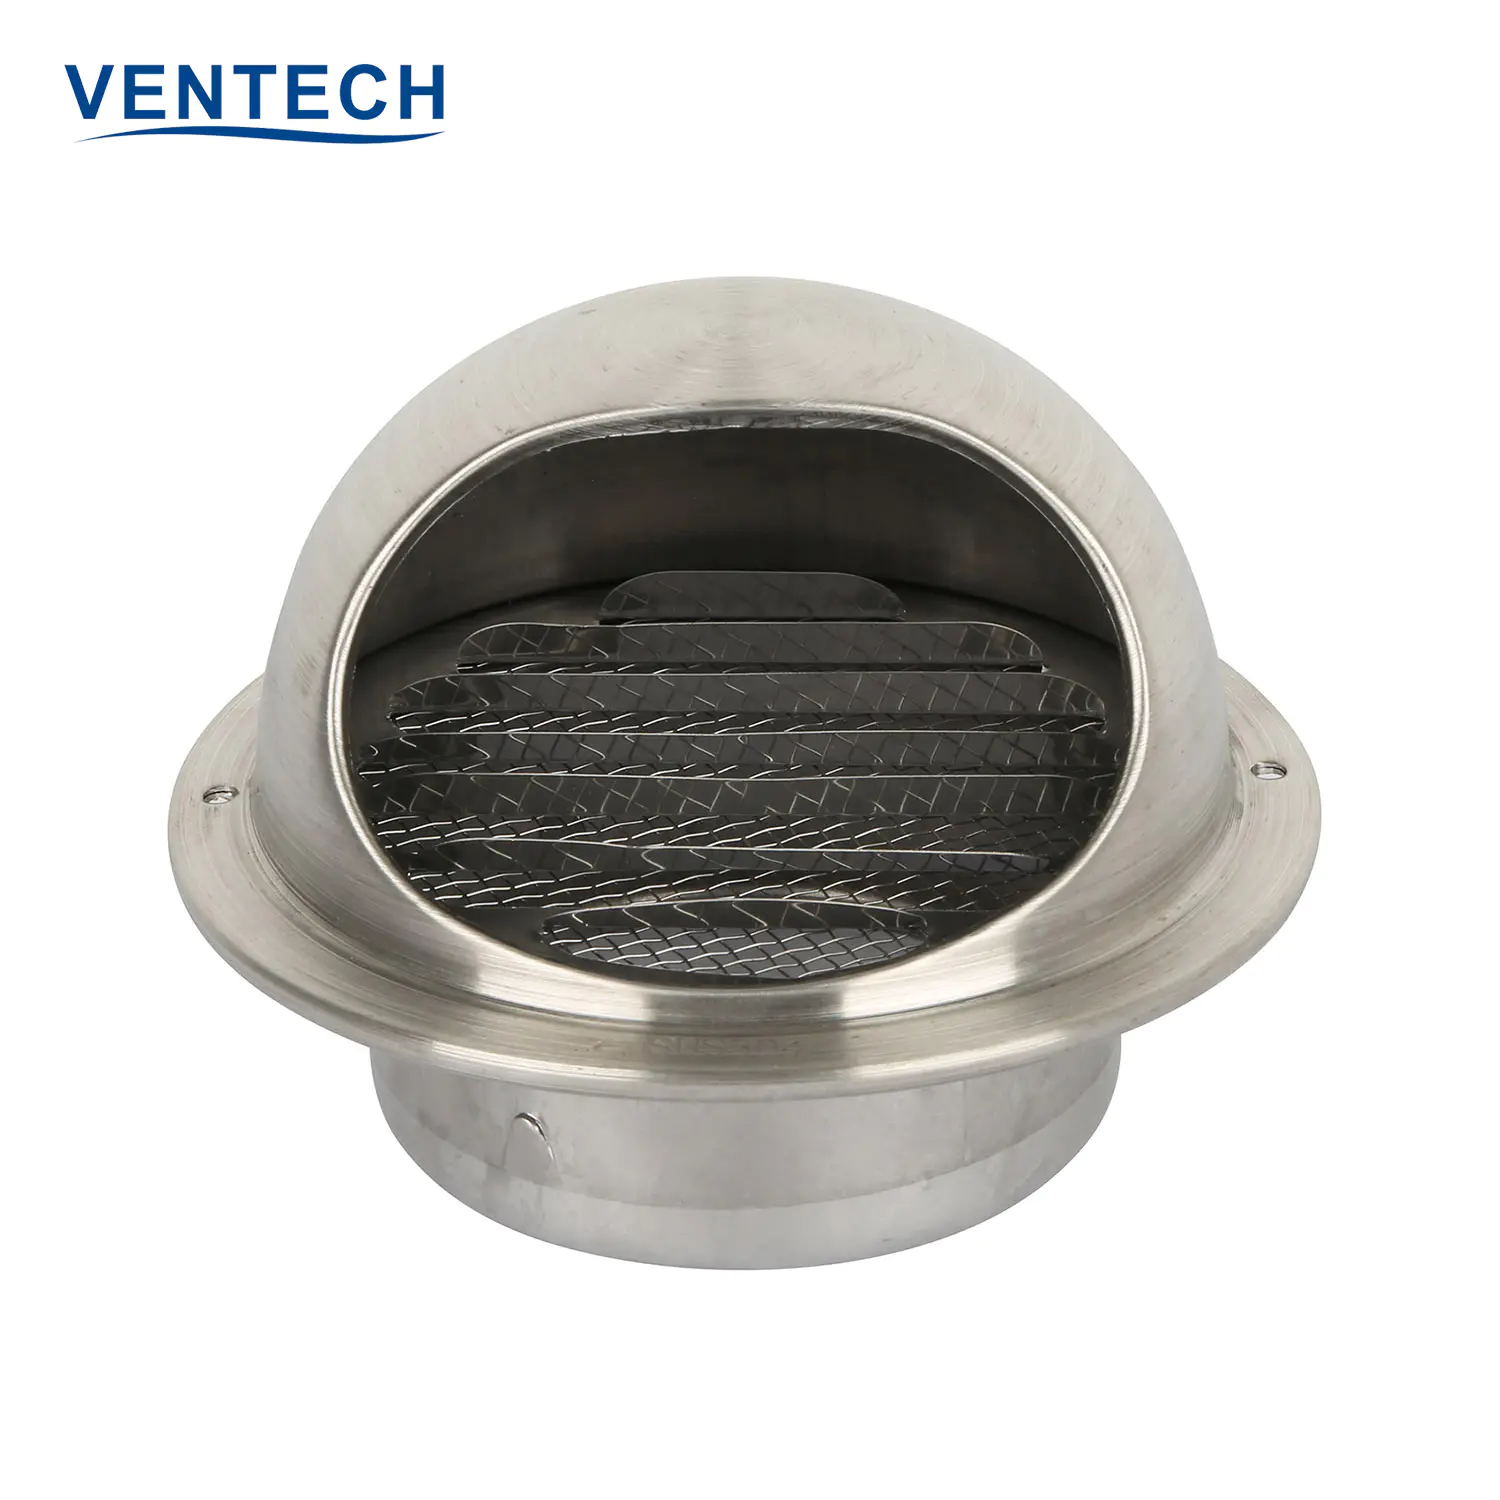 Ventech Hvac System Waterproof Weather Louver With Insect Mesh